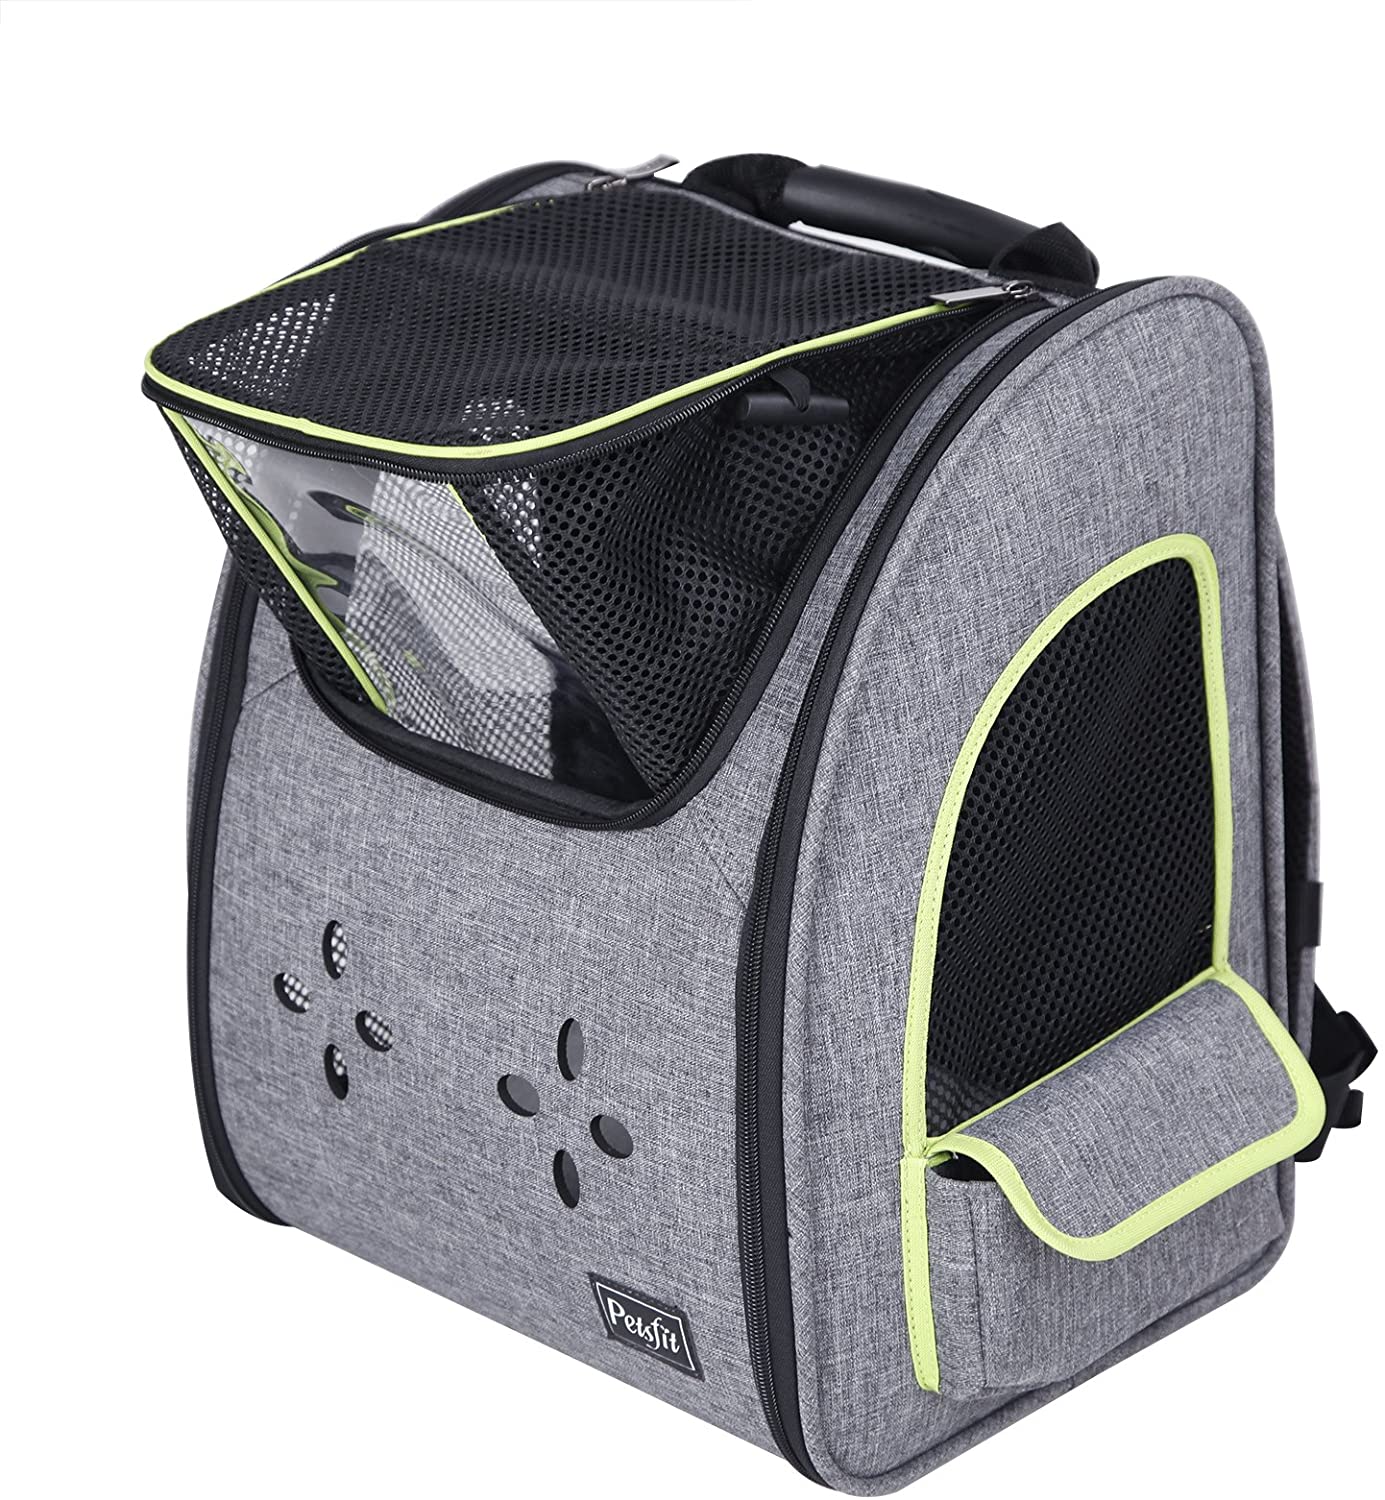 Petsfit Small Animal Carrier 